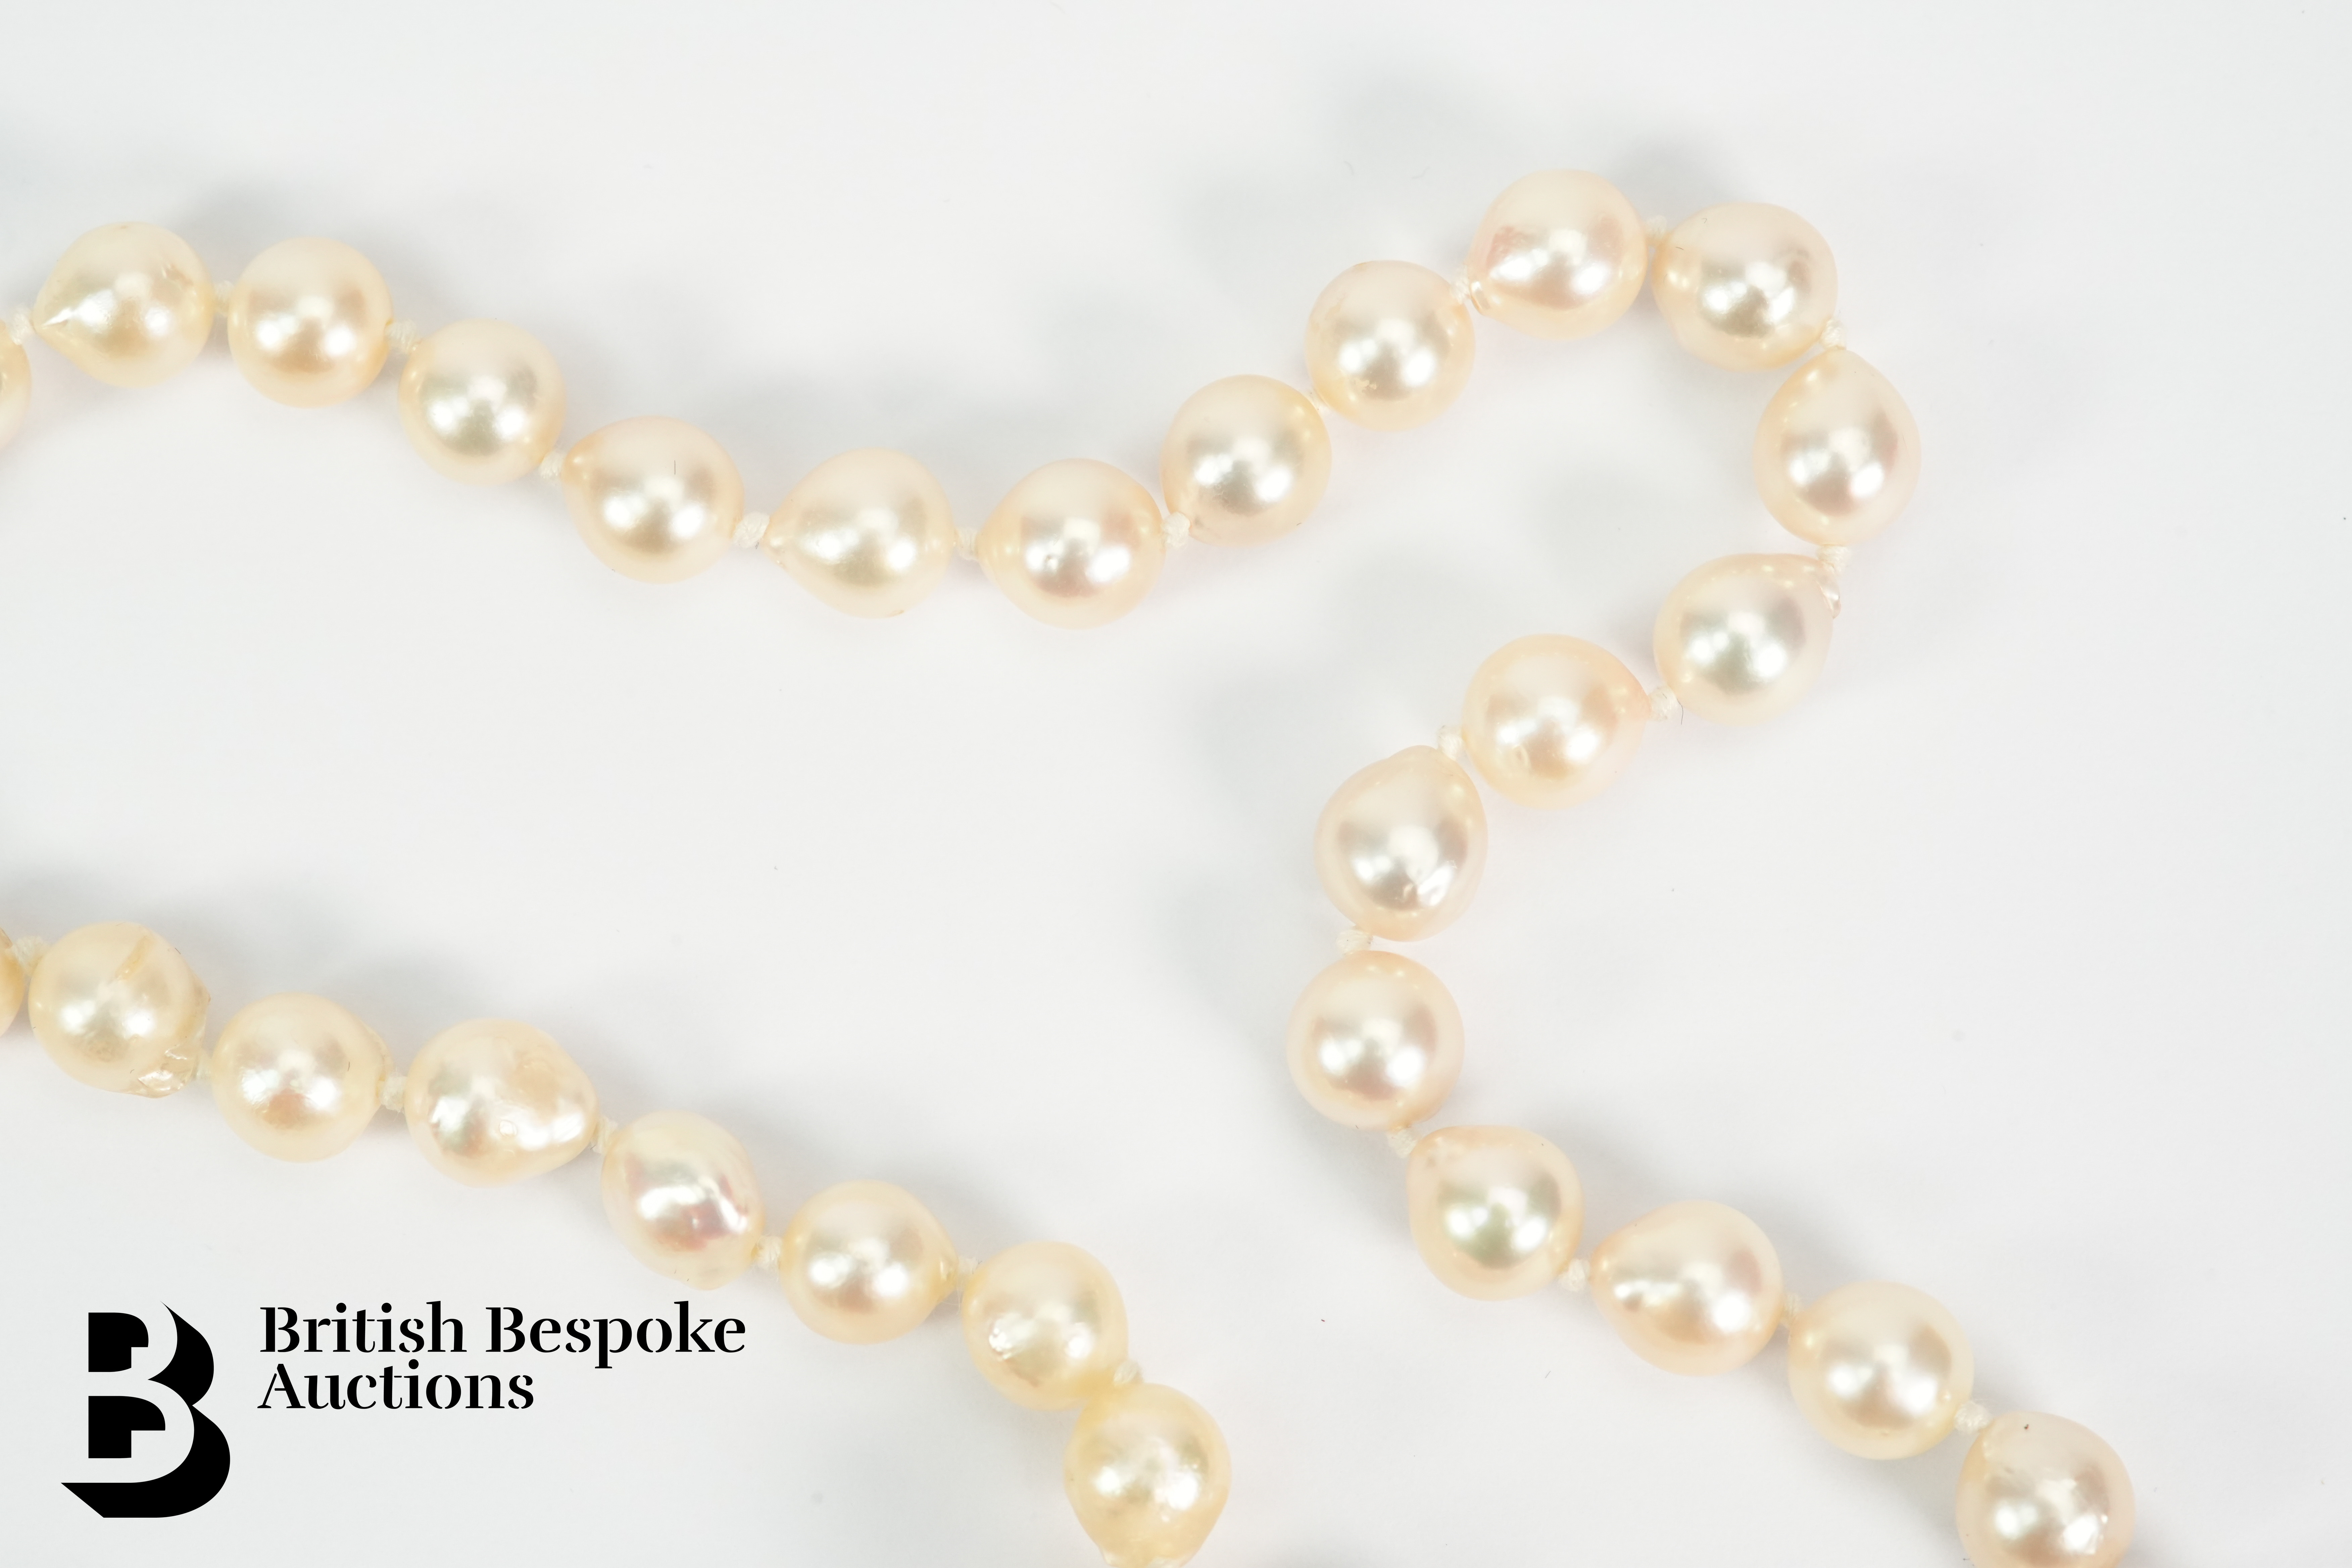 Single Strand Pearl Necklace - Image 3 of 5